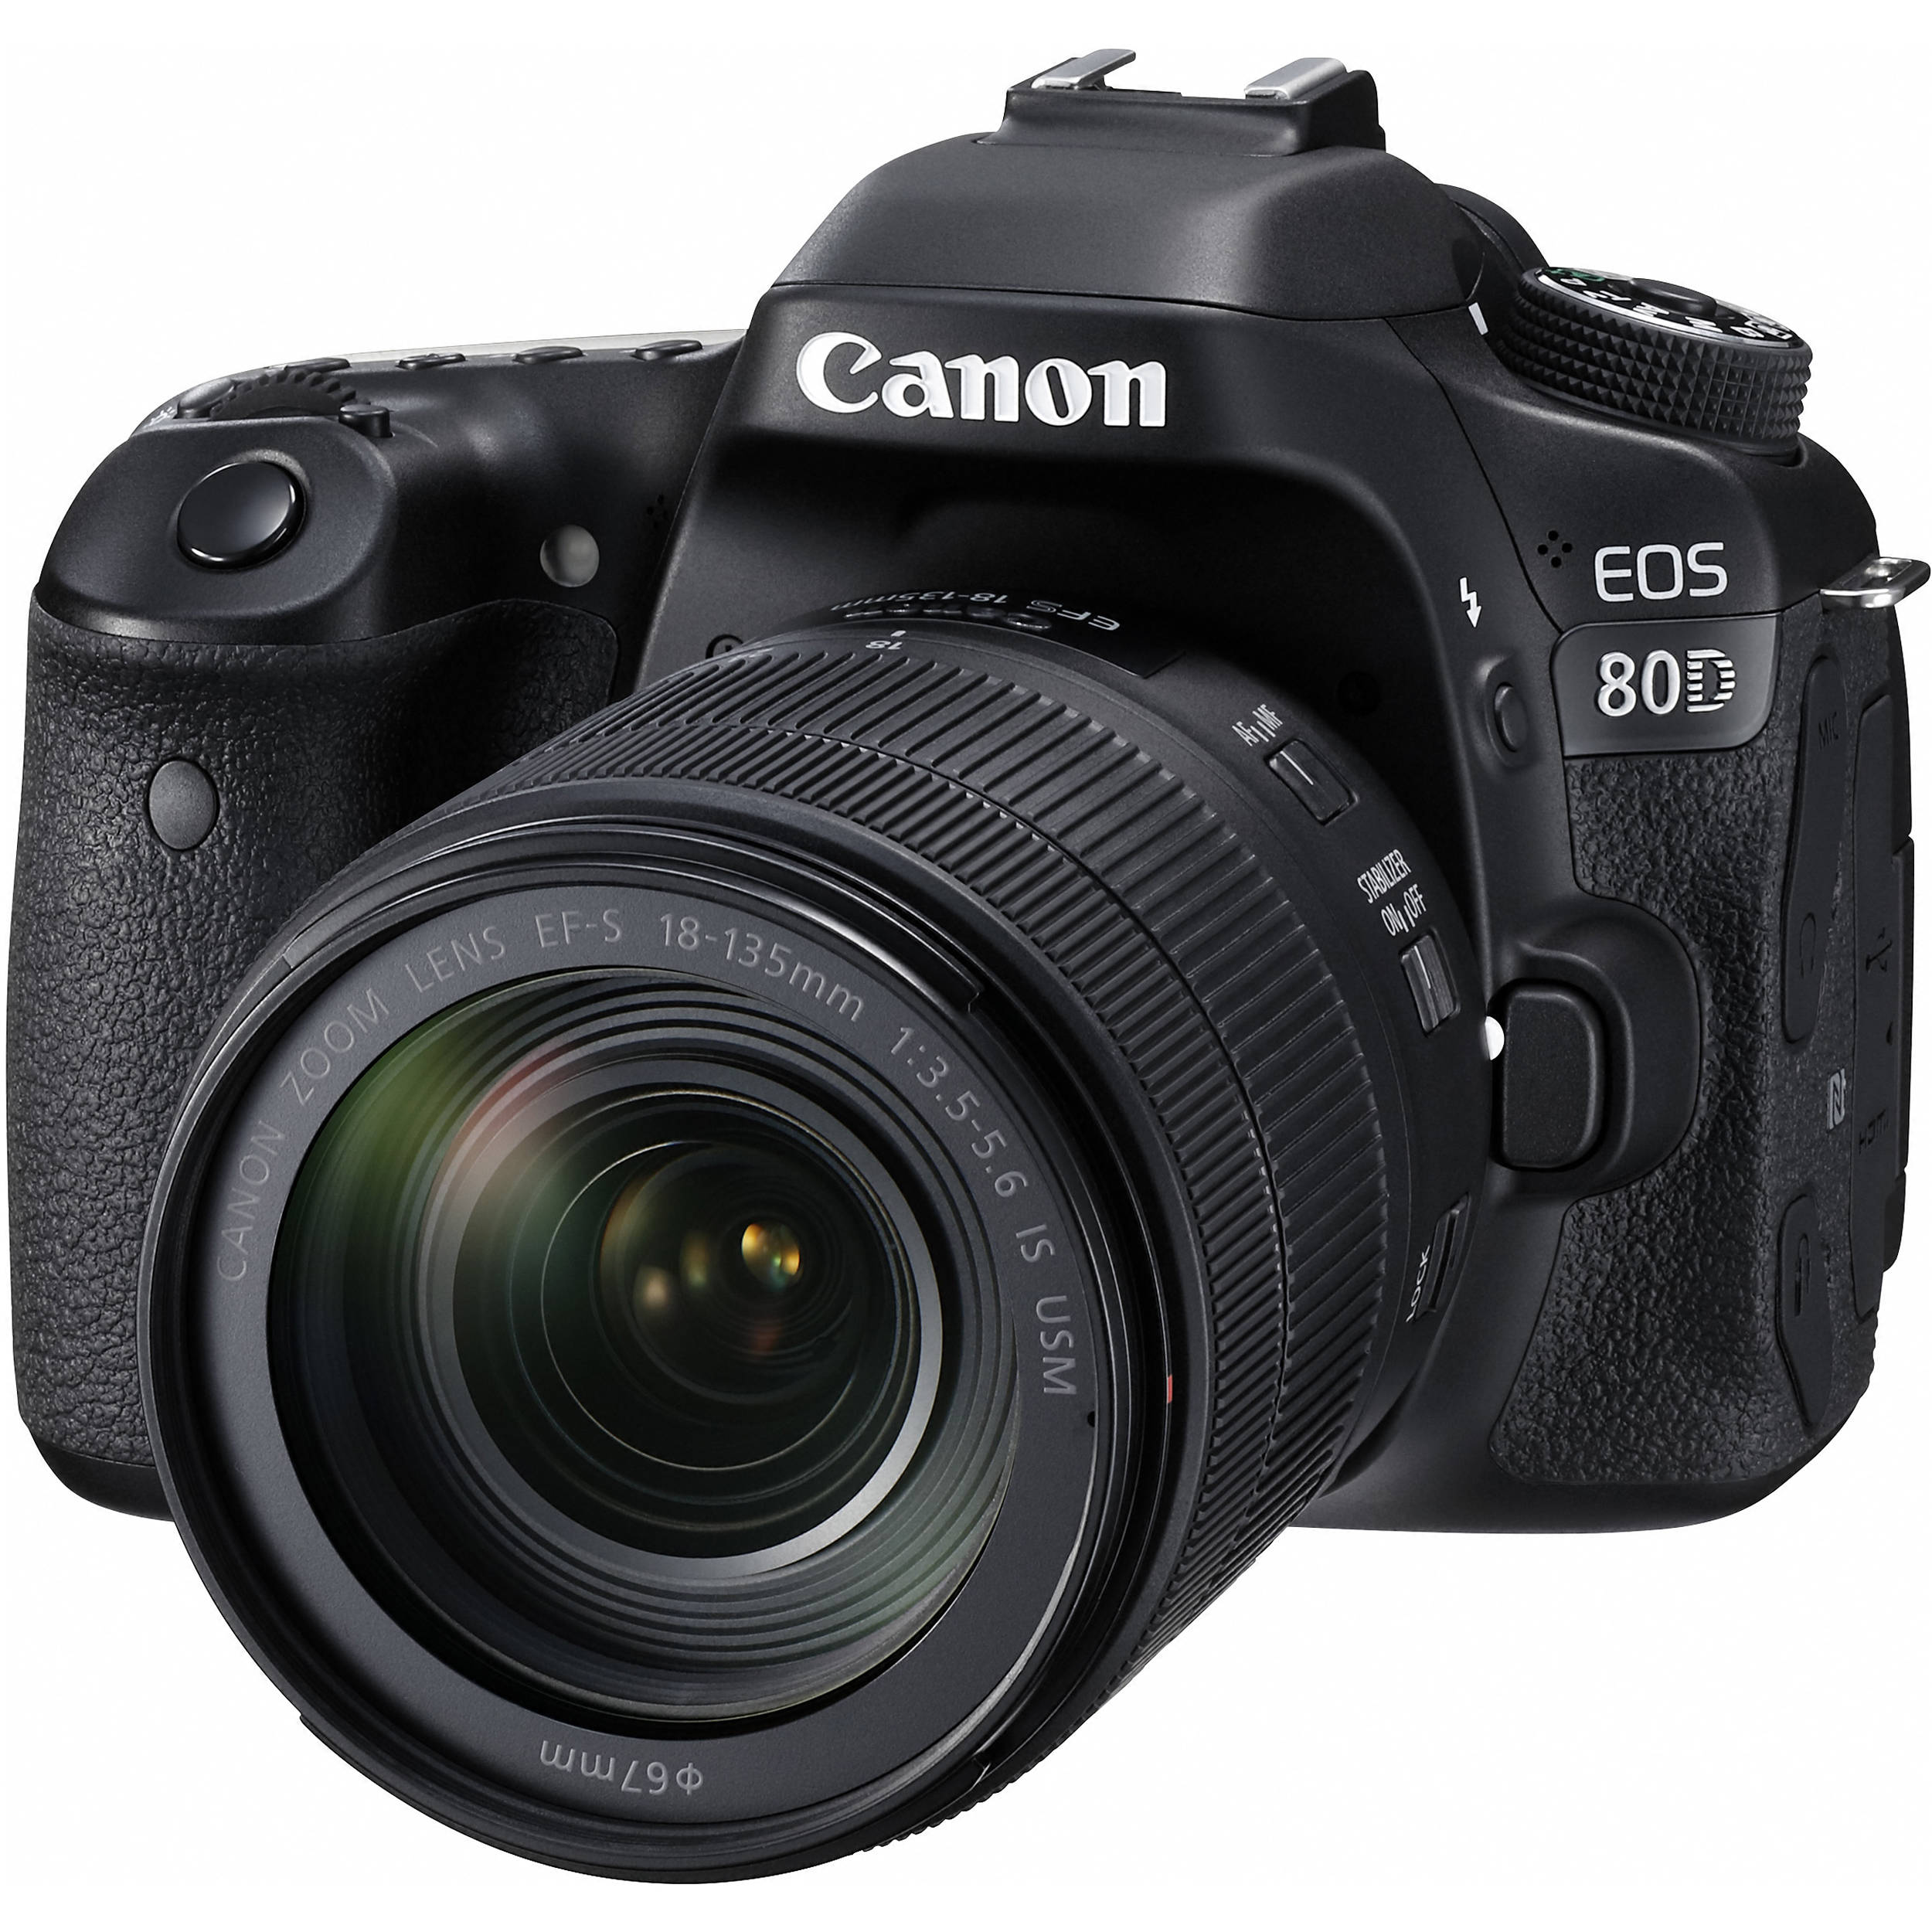 Canon Eos 80d Dslr Camera With 18 135mm Lens 1263c006 B H Photo